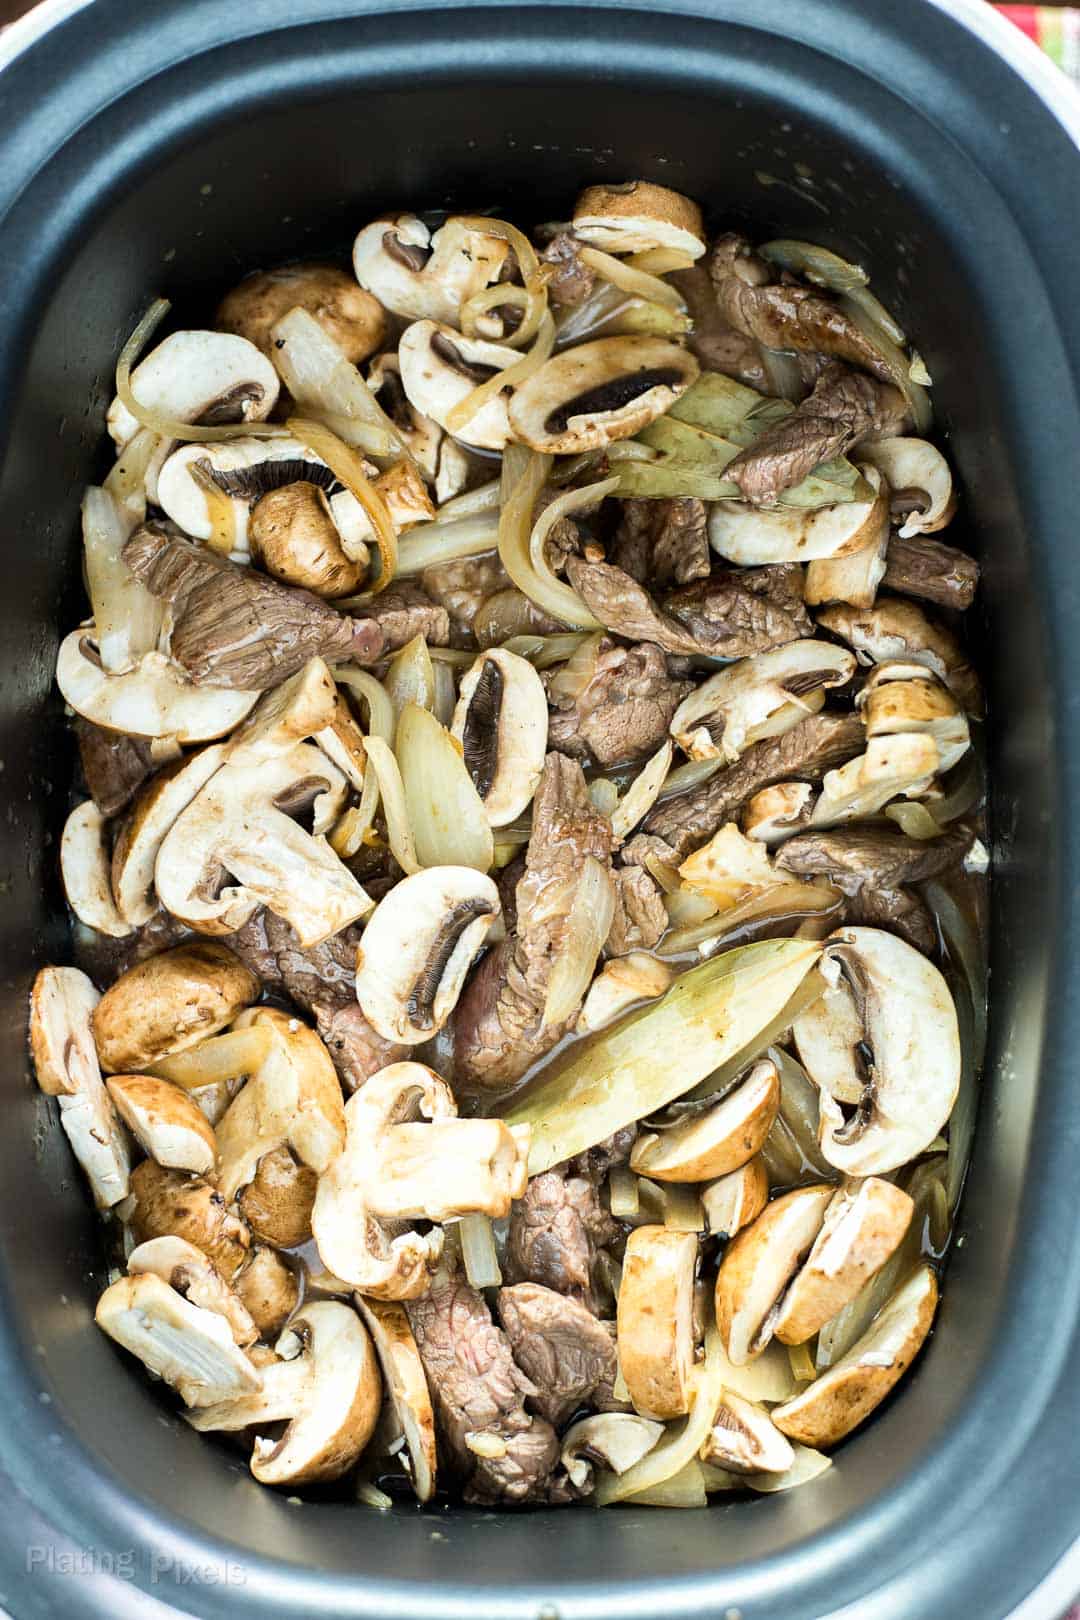 Steak and mushrooms in a slow cooker to make Slow Cooker Beef Stroganoff